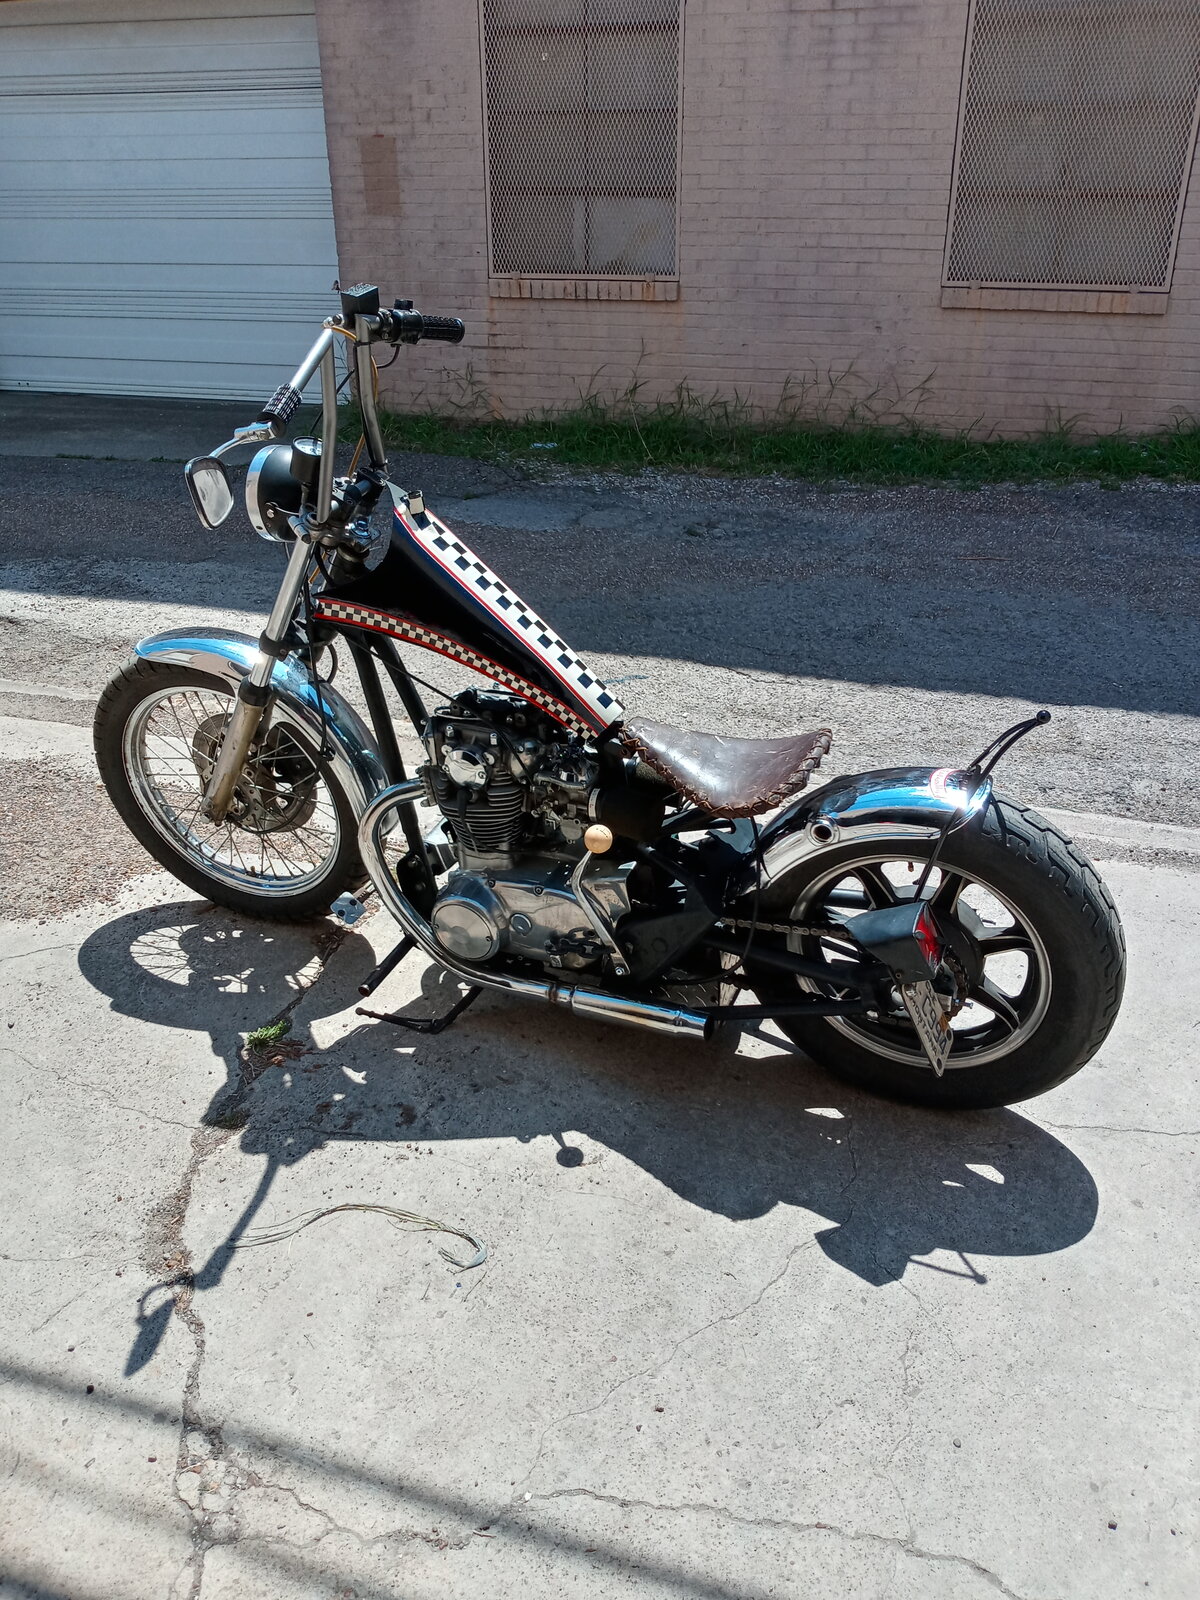 Chopper Motorcycles for sale in Steins, New Mexico